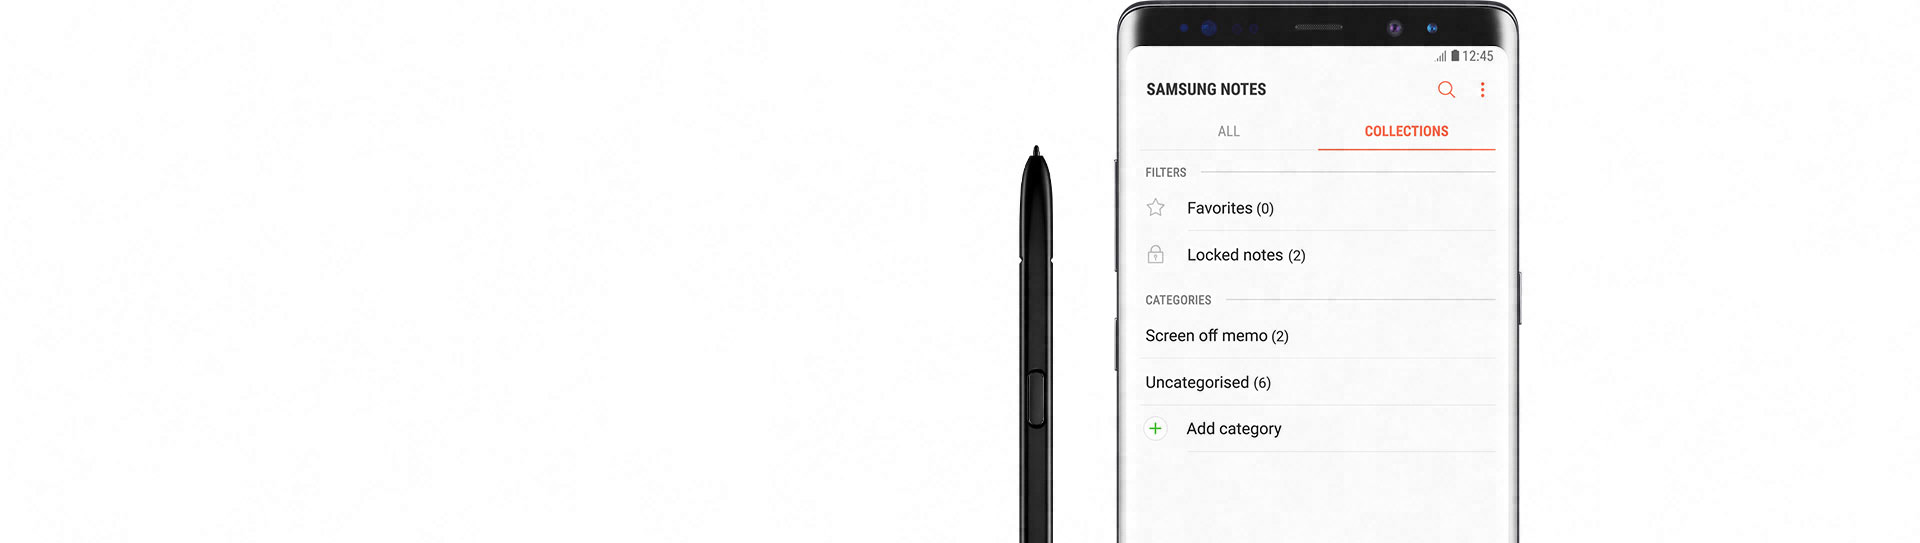 Example of different categories set on Samsung Notes app on Galaxy Note8 Black